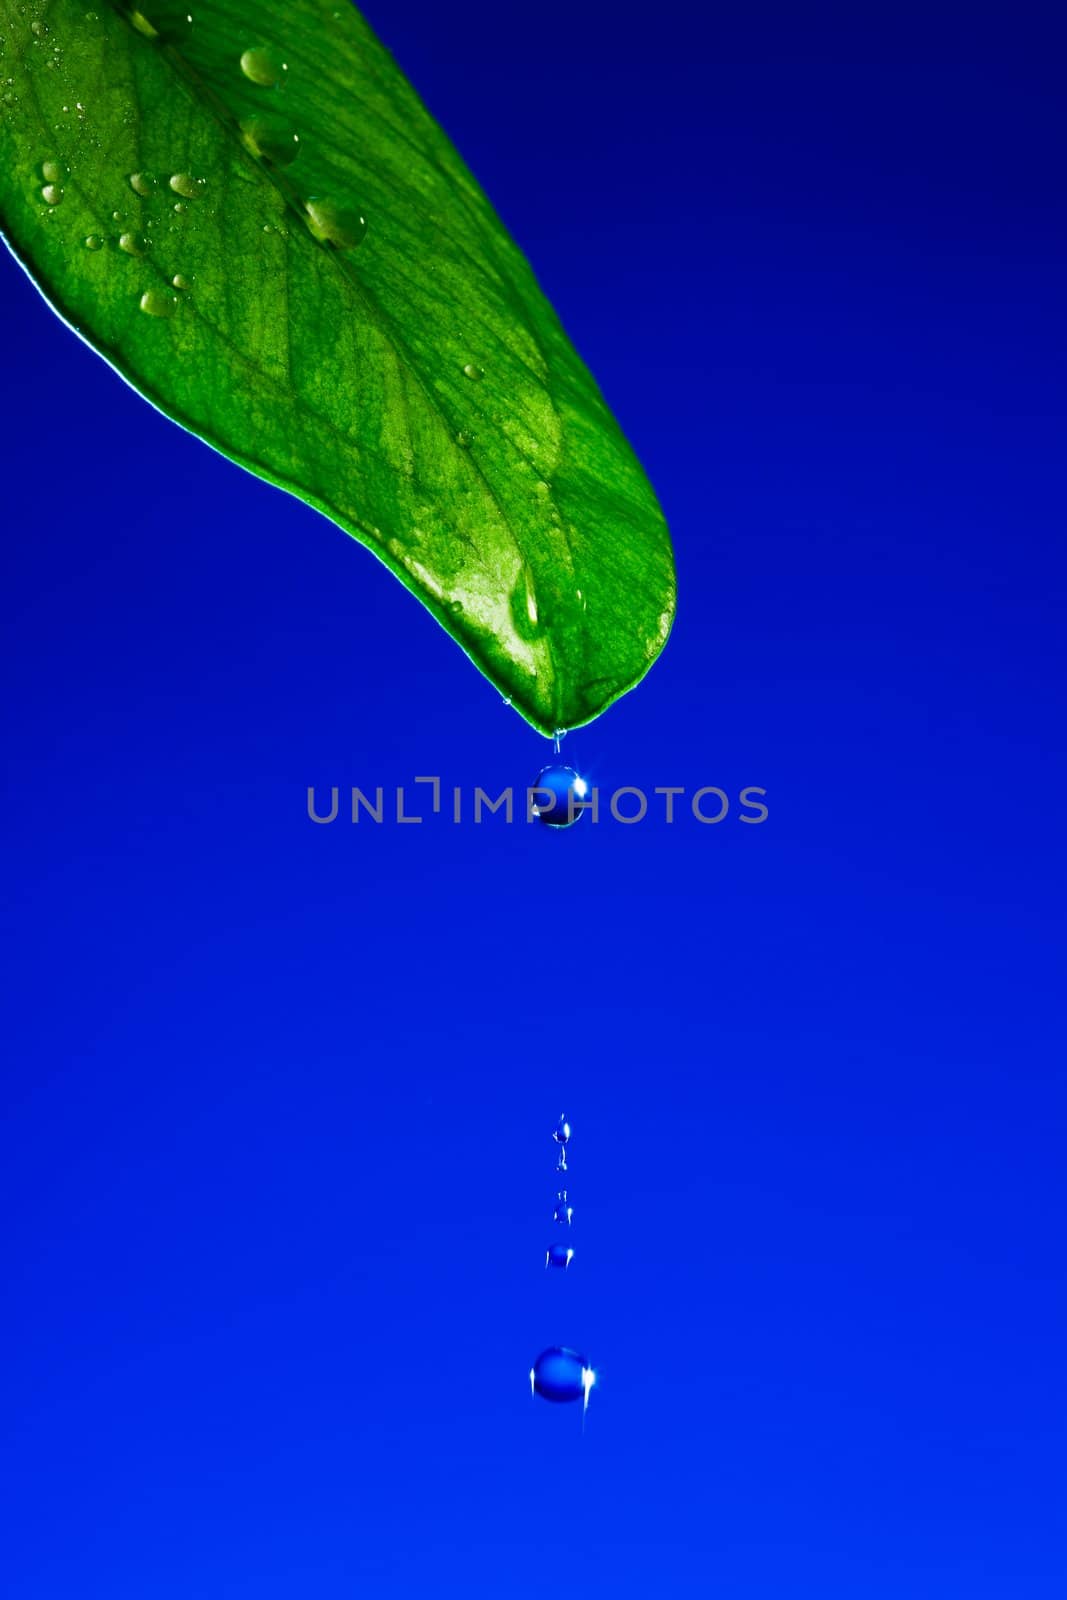 The drop falls from leaf by Gravicapa